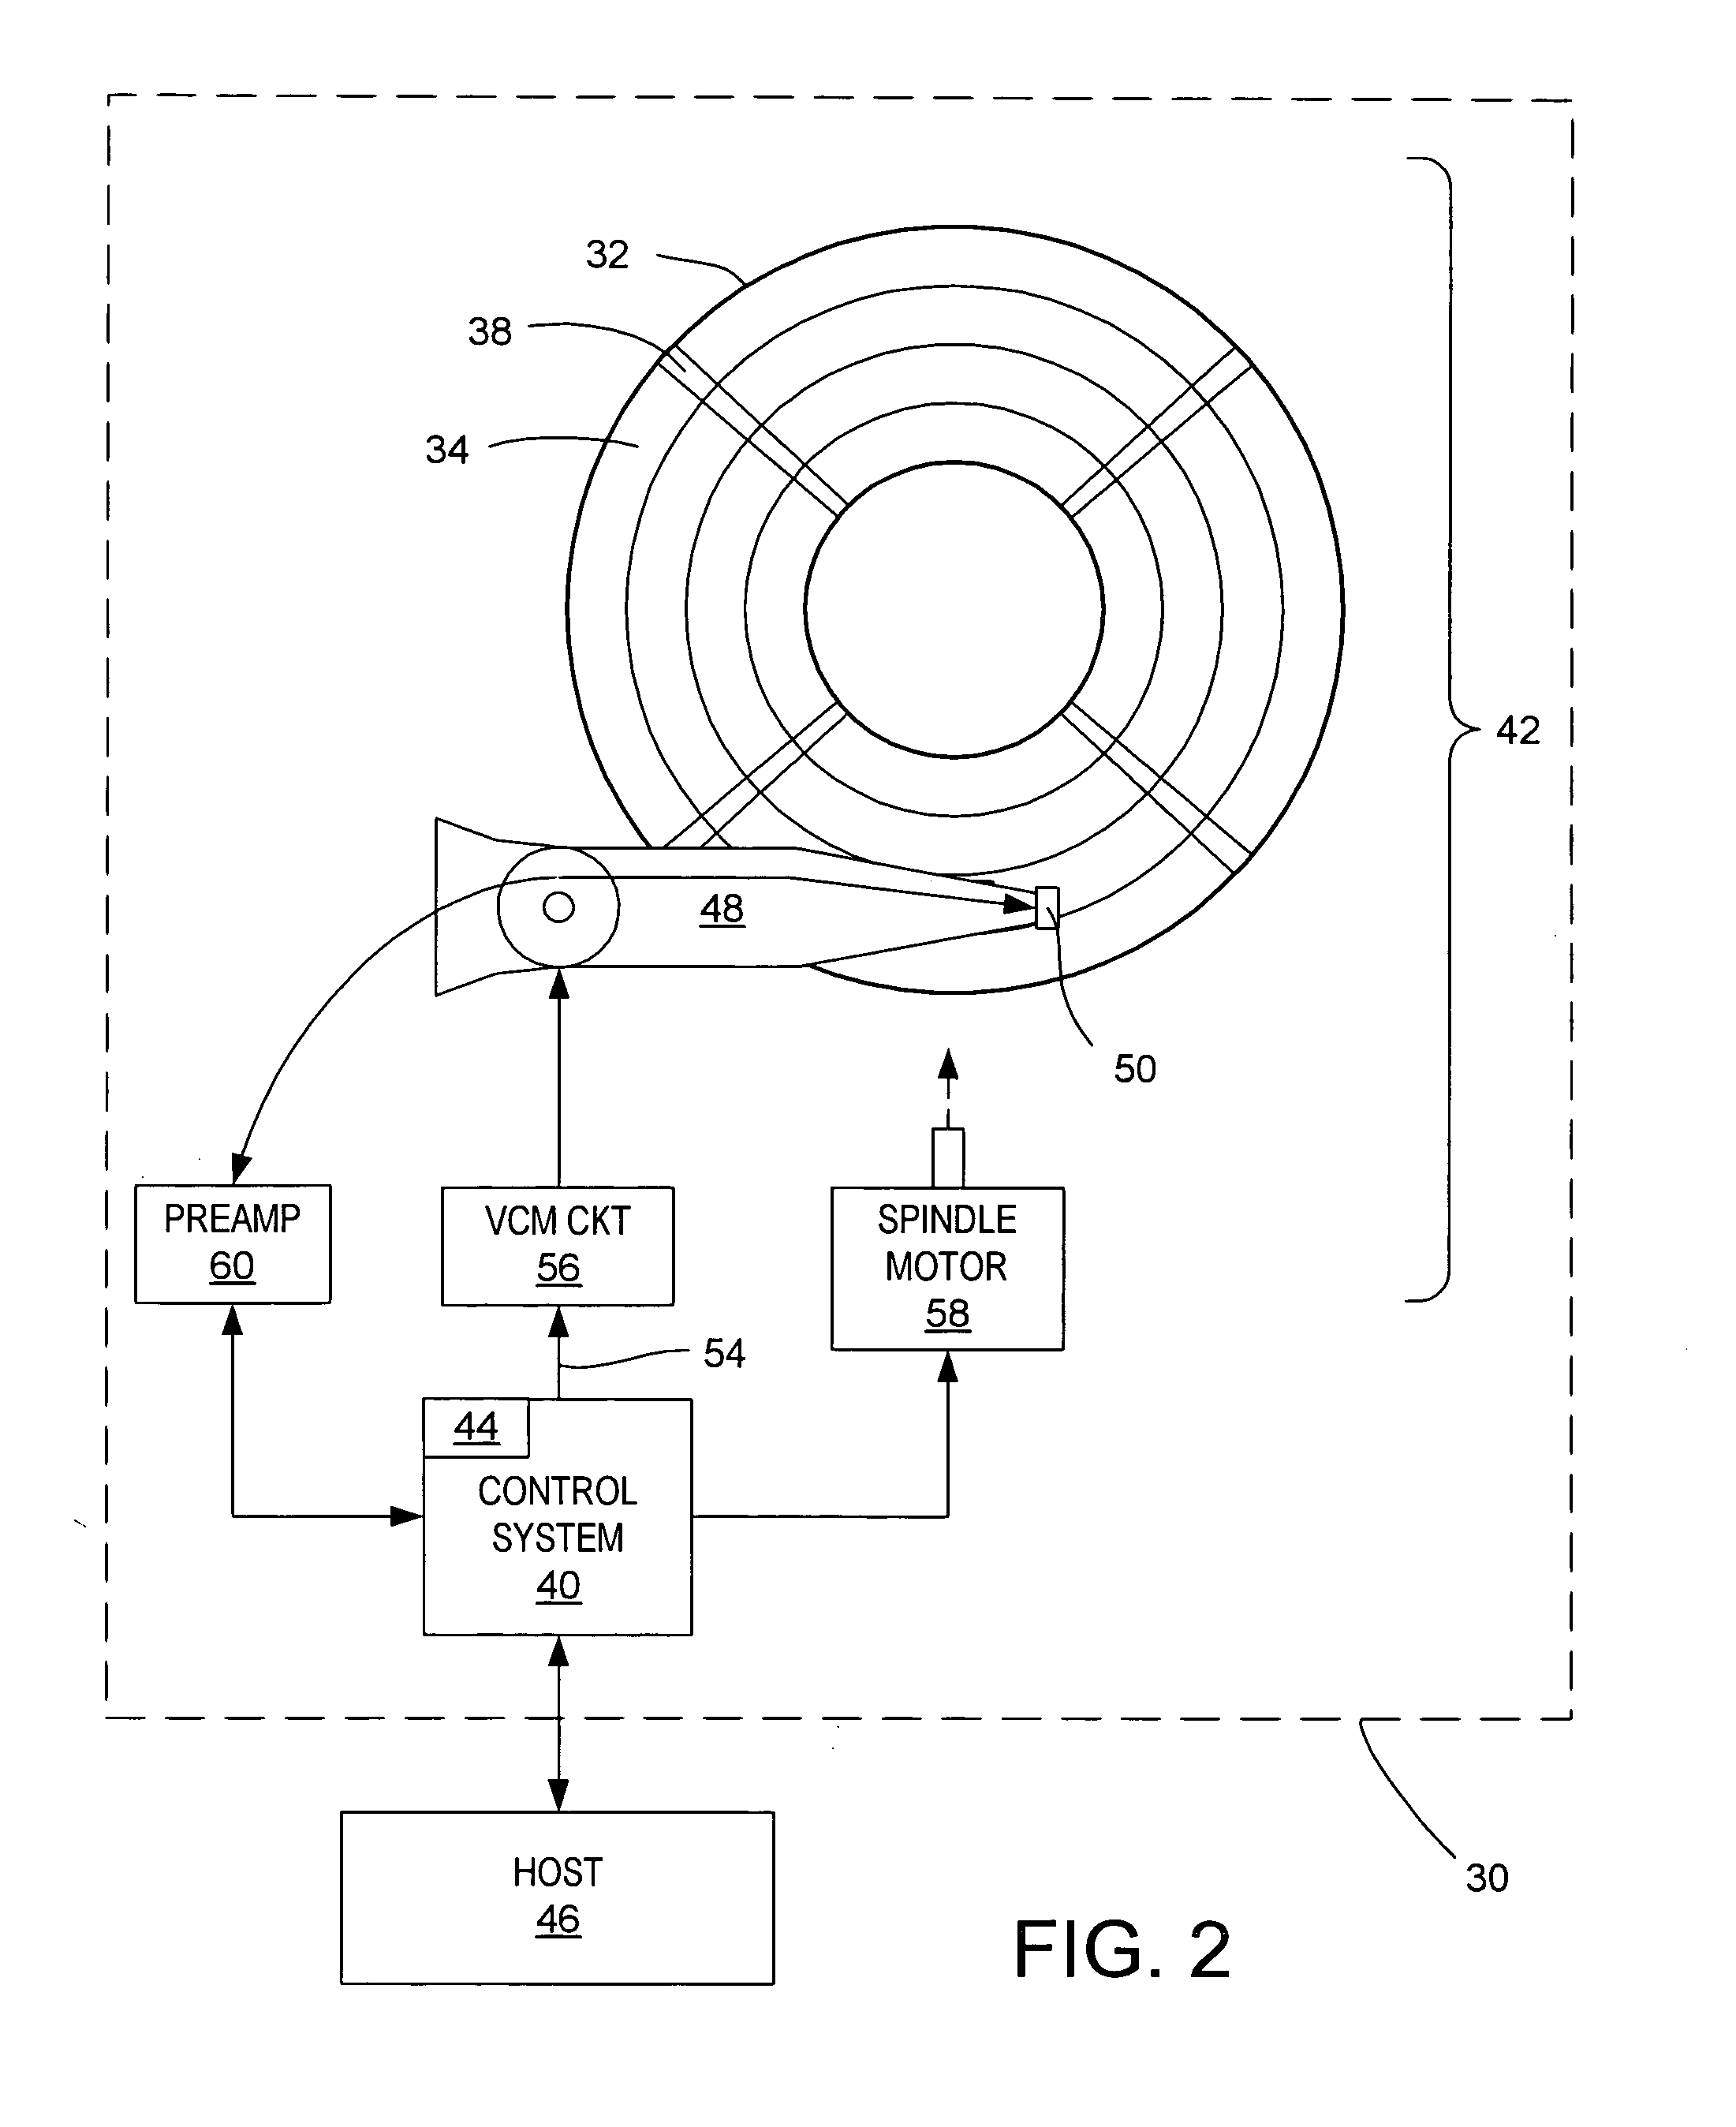 Method for iteratively determining repeatable runout cancellation values in a magnetic disk drive